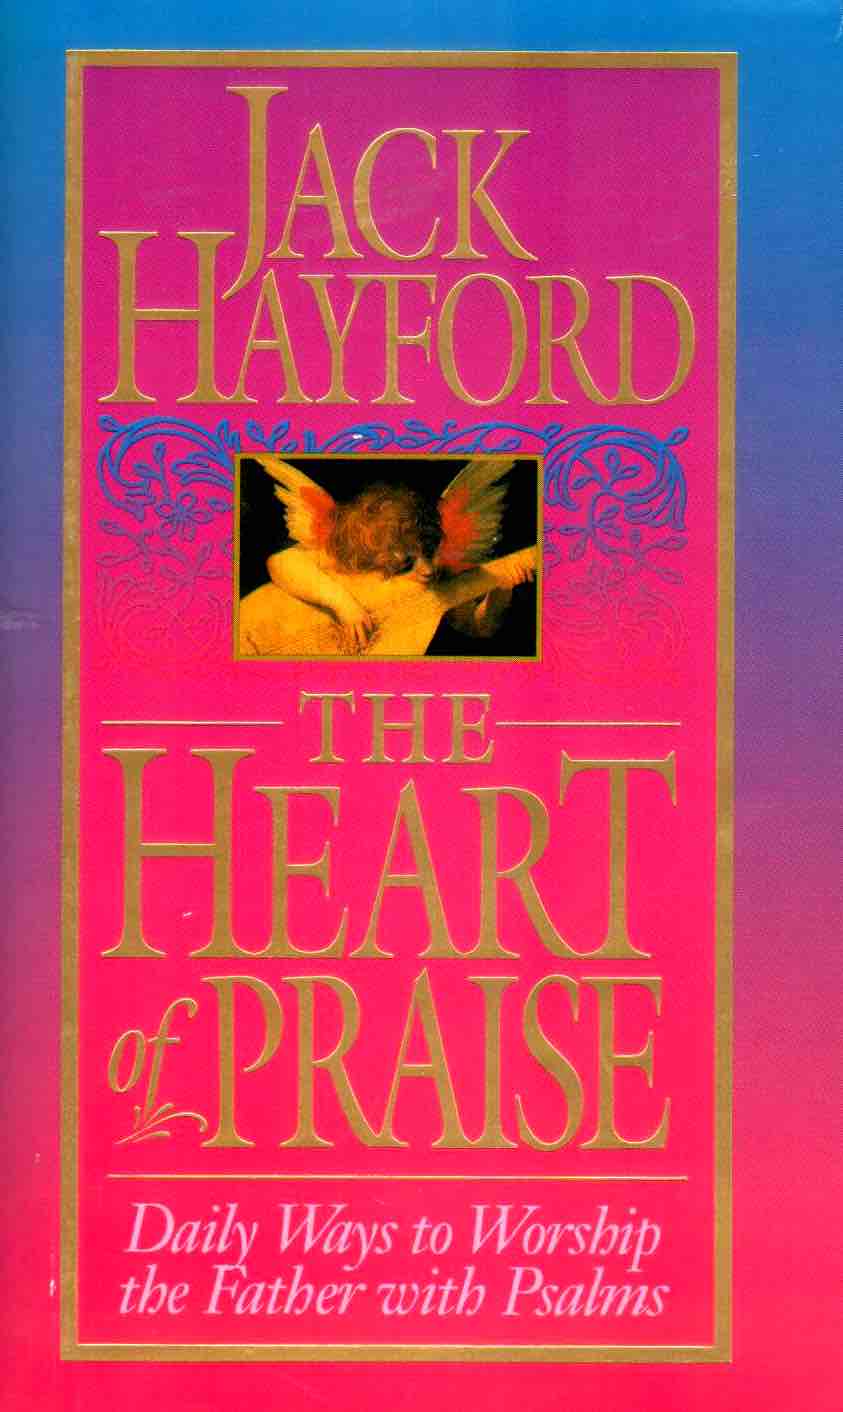 Cover of The Heart of Praise